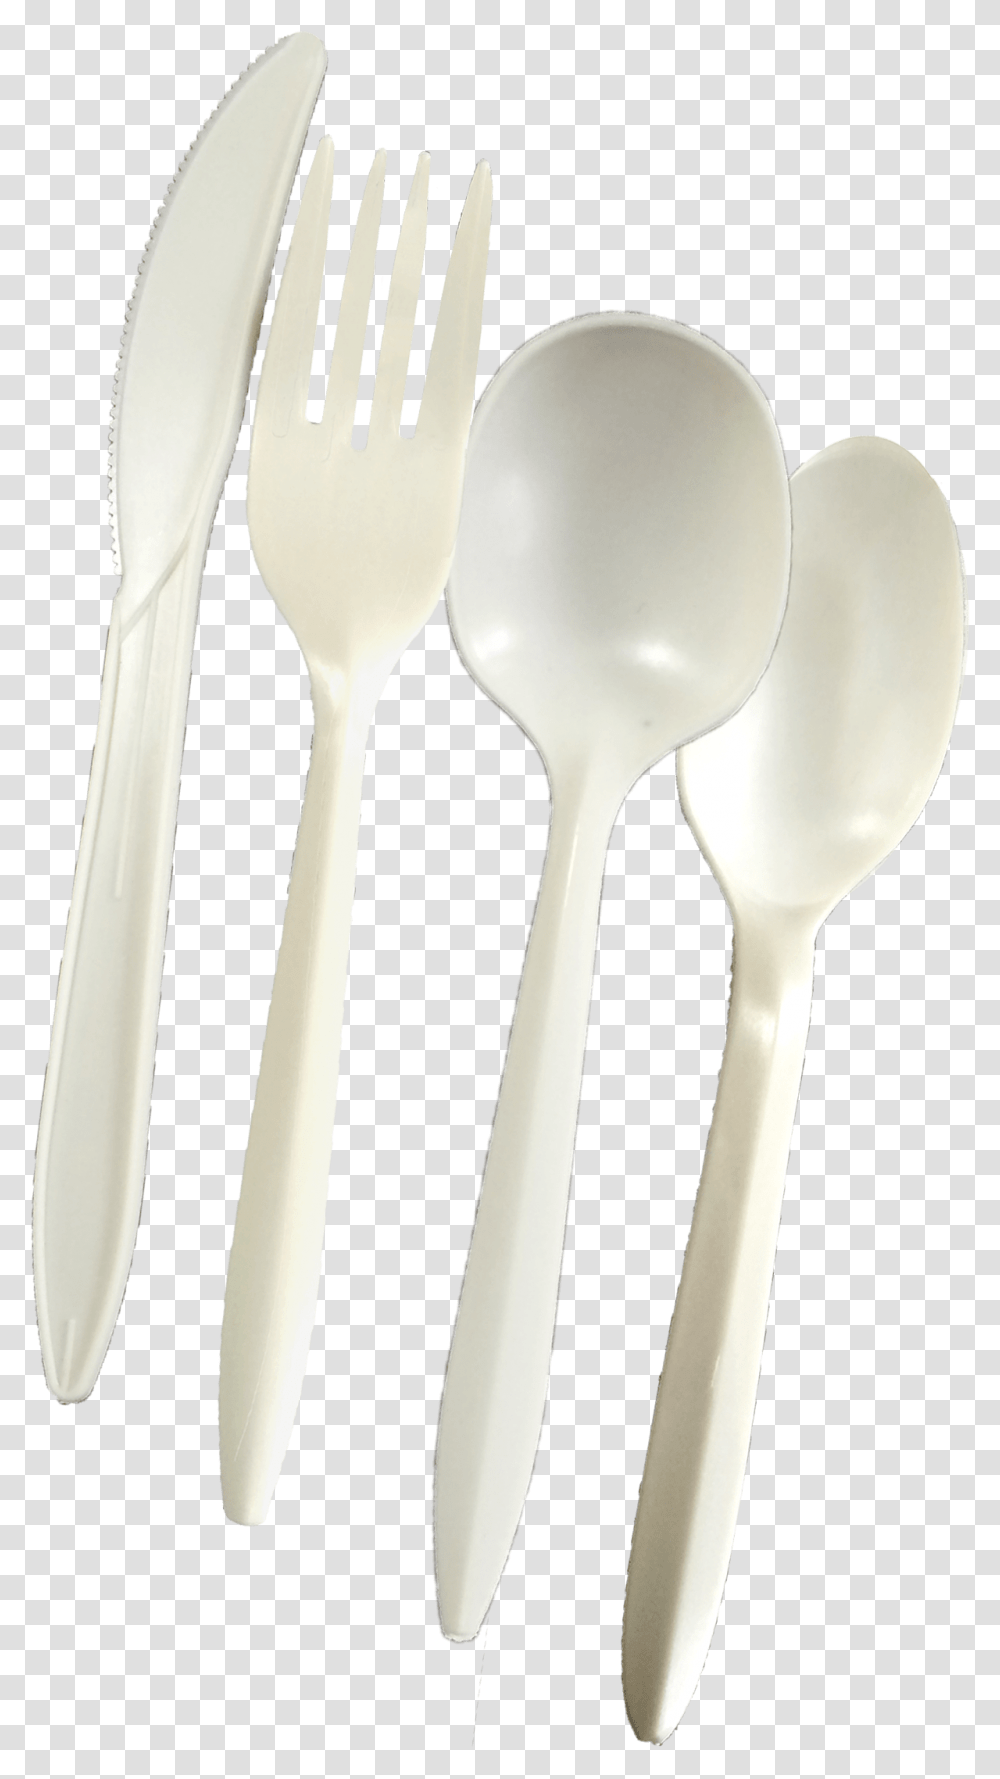 Line Of Disposable Retail Knife, Cutlery, Spoon, Fork Transparent Png